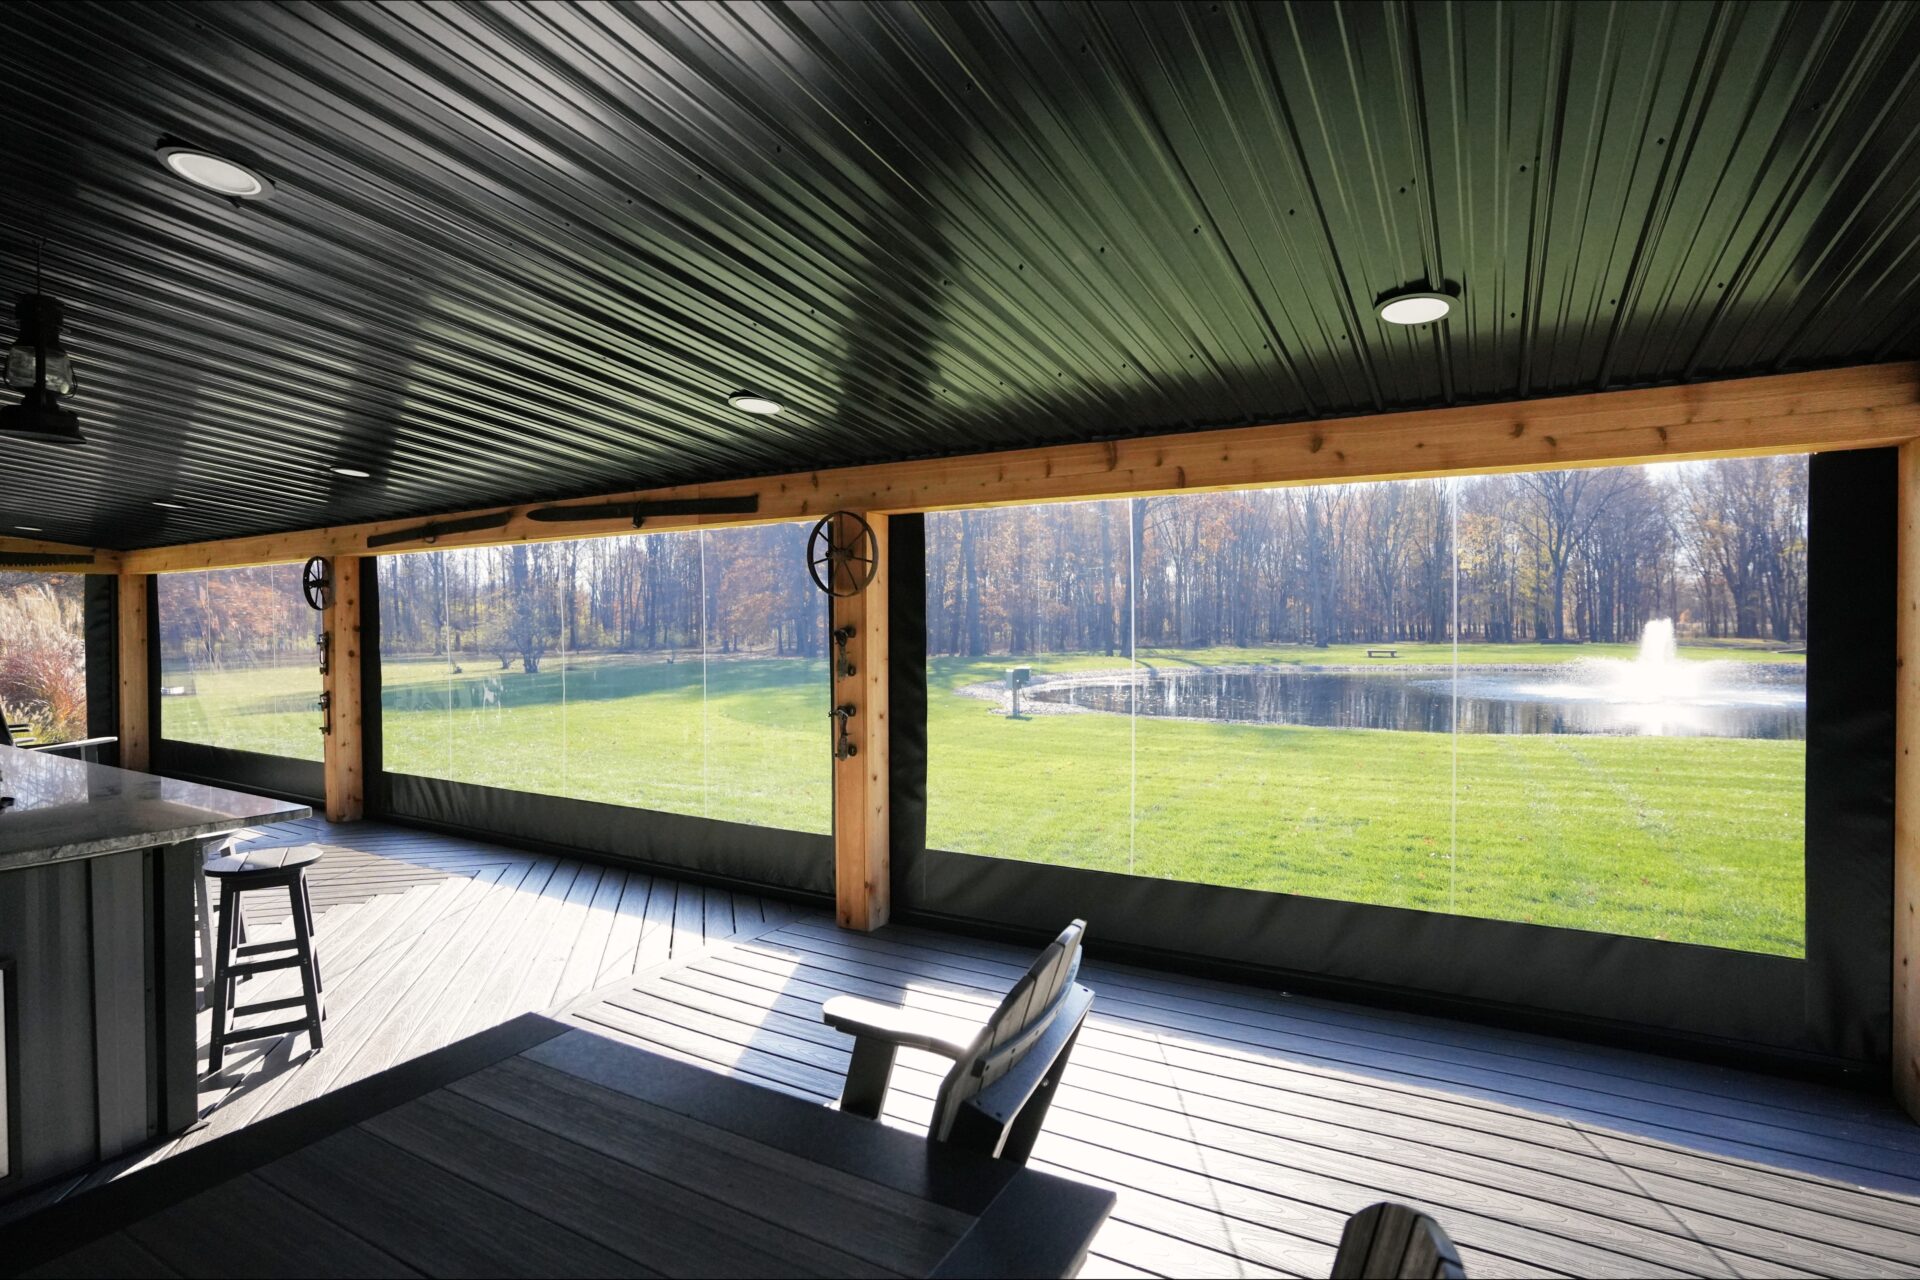 This back porch in Columbia Station, Ohio converts from an open outdoor space into a four-season room with Phantom’s Motorized Vinyl. Screening Solutions Ohio installed five large clear vinyl units to enclose this porch. The vinyl retains the heat in during the winter so the homeowner can enjoy their patio space year-round. The vinyl drops down sealing in the space and keeps out rain and snow.